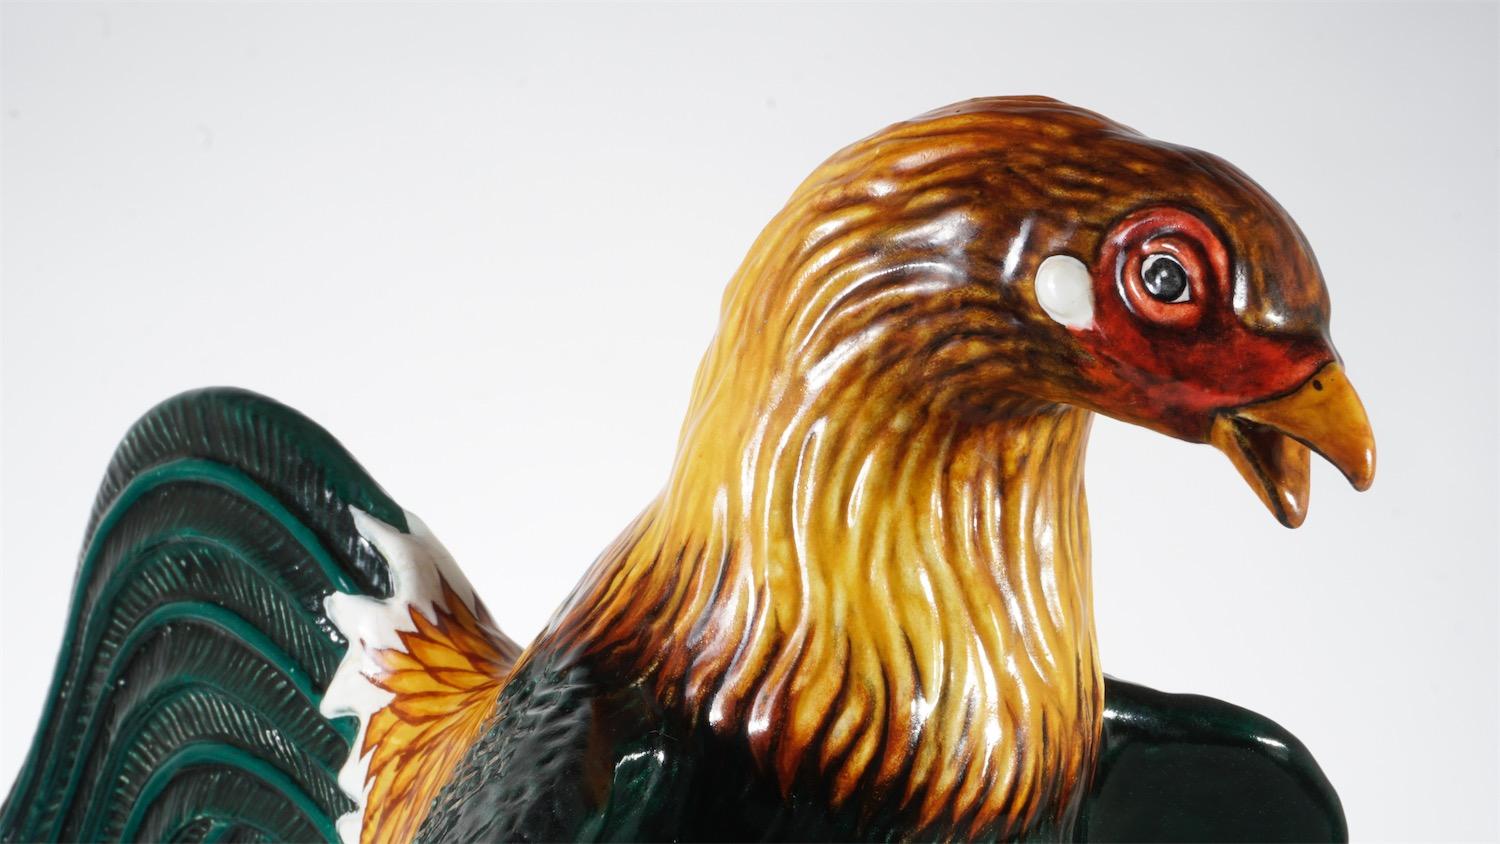 Always unique pieces is what you are going to hear about Jesus Guerrero Santo's work, all the pieces are handmade and created one by one it takes months to produce each peace.
This Ceramic and white metal (alpaca) roosters, was created in Tonalá,